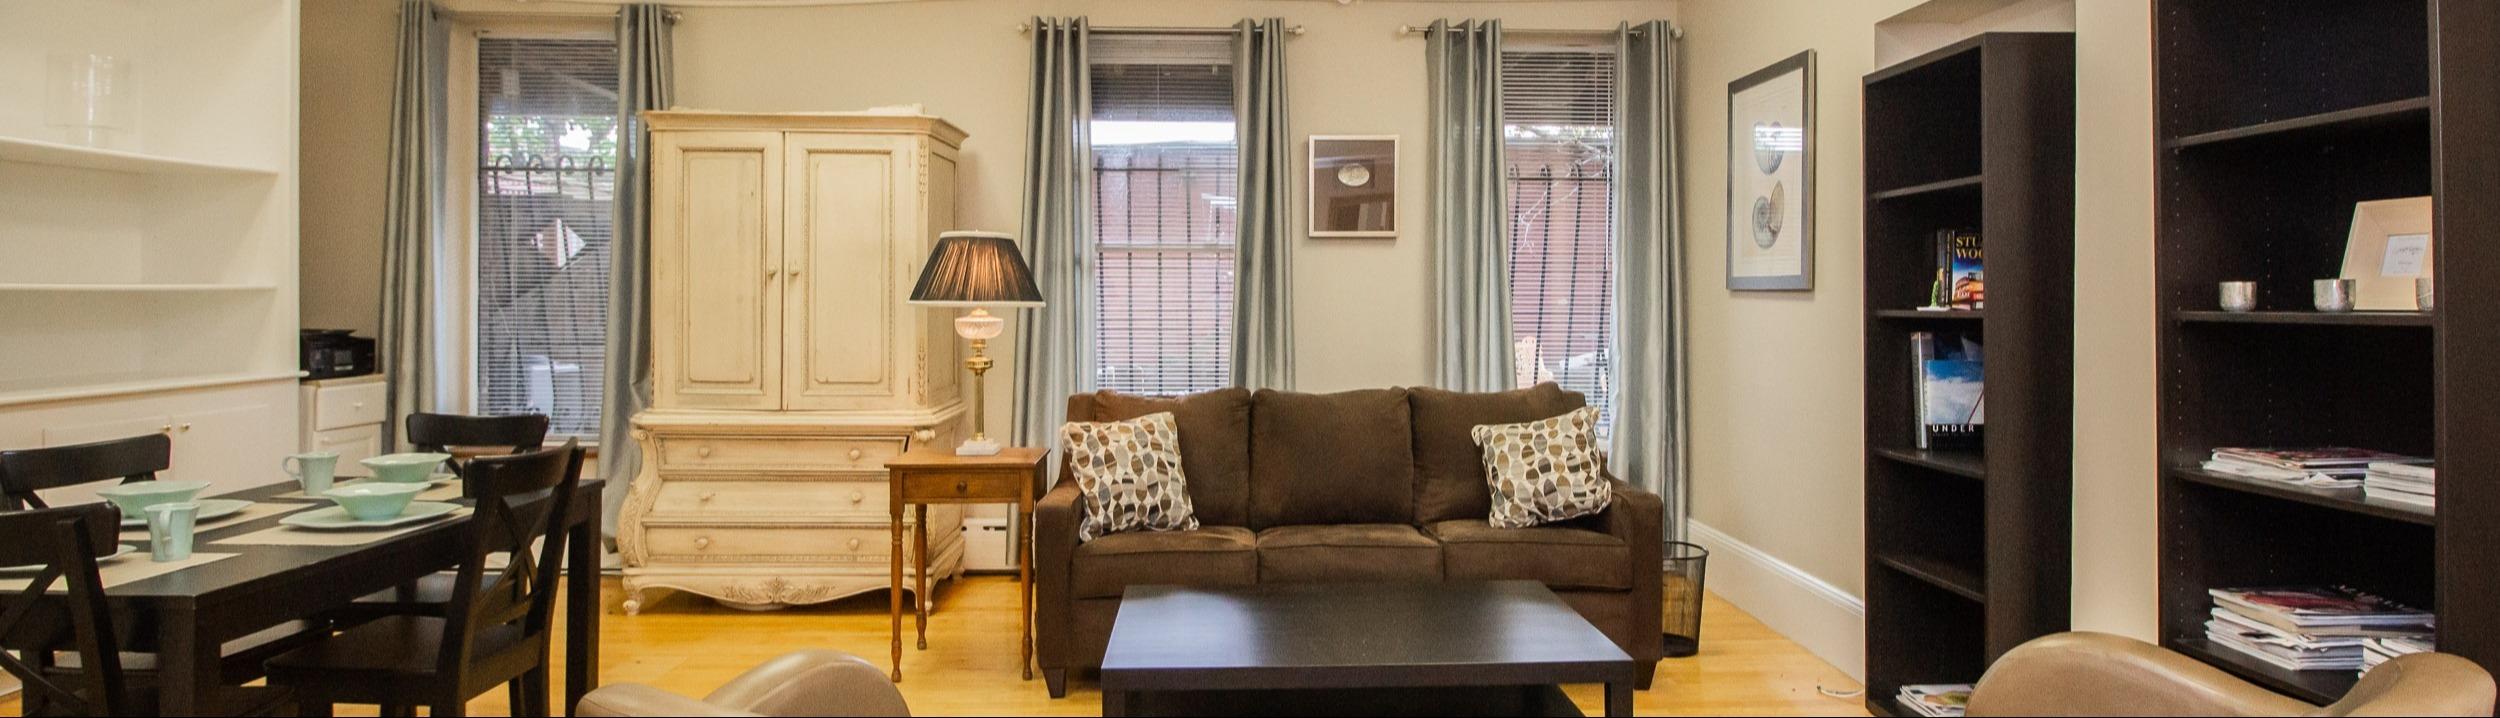 Over-sized historic 1Bedroom in Back Bay- MGH, BU, MIT